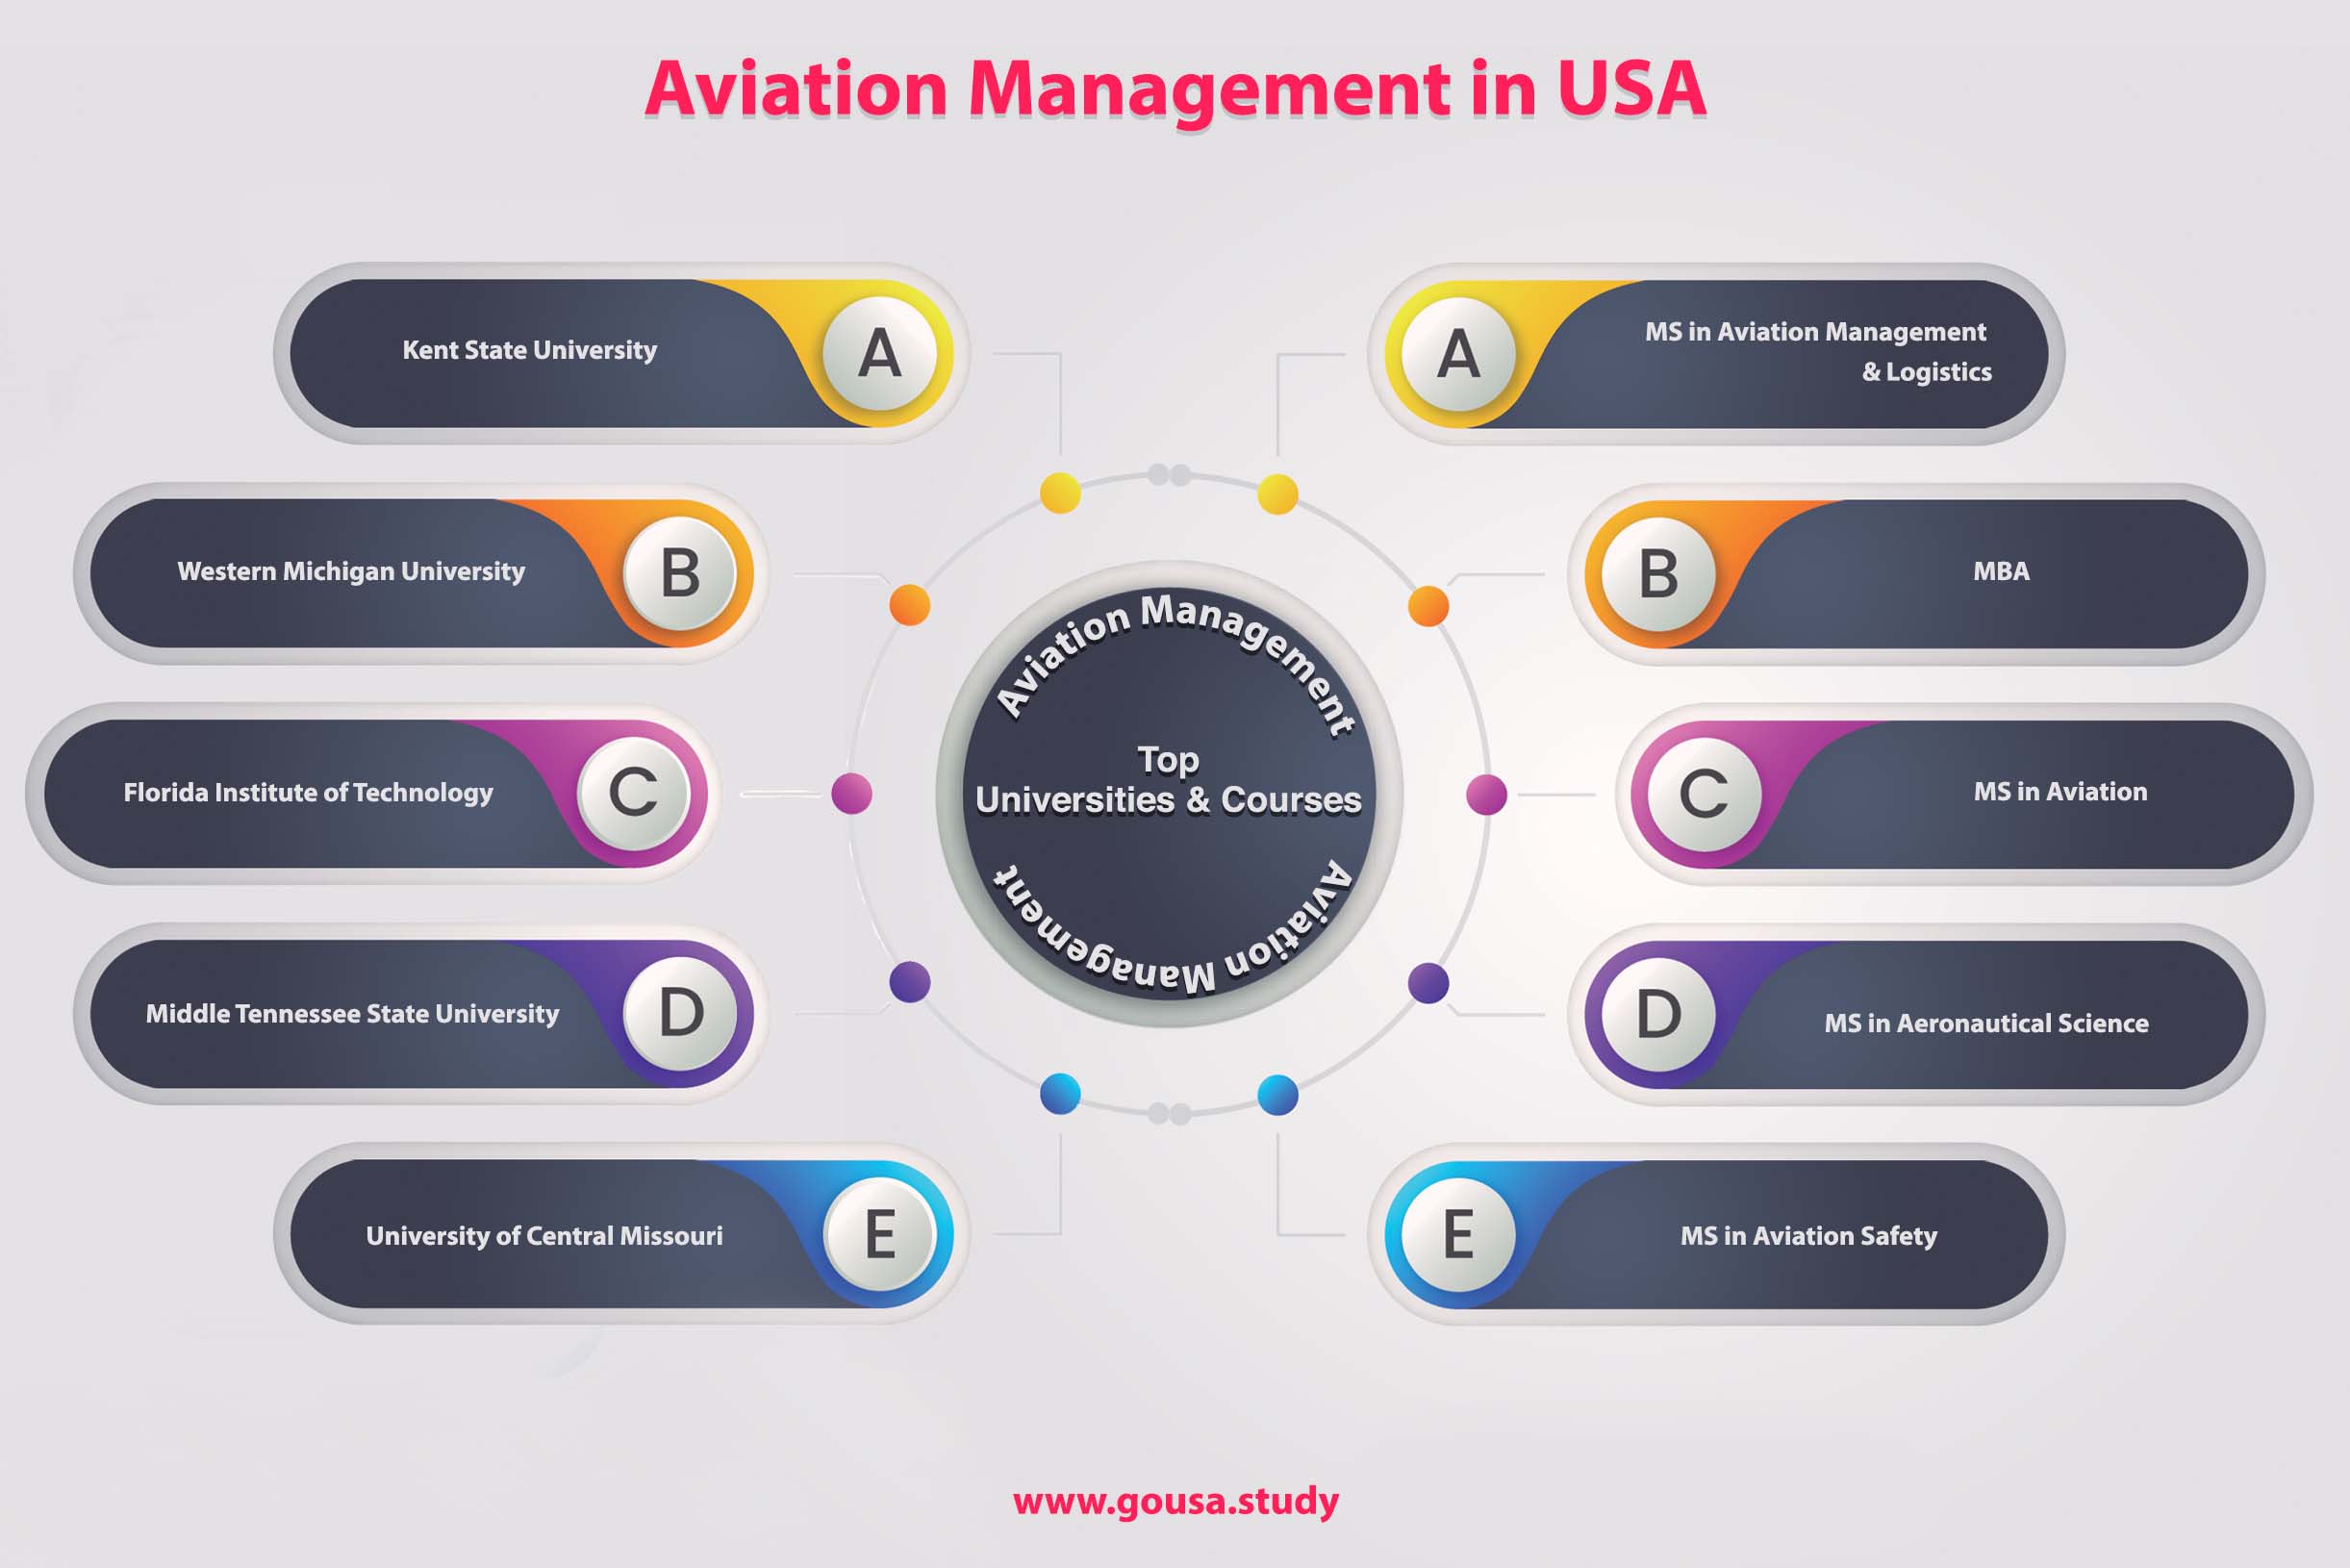 Aviation Management in USA